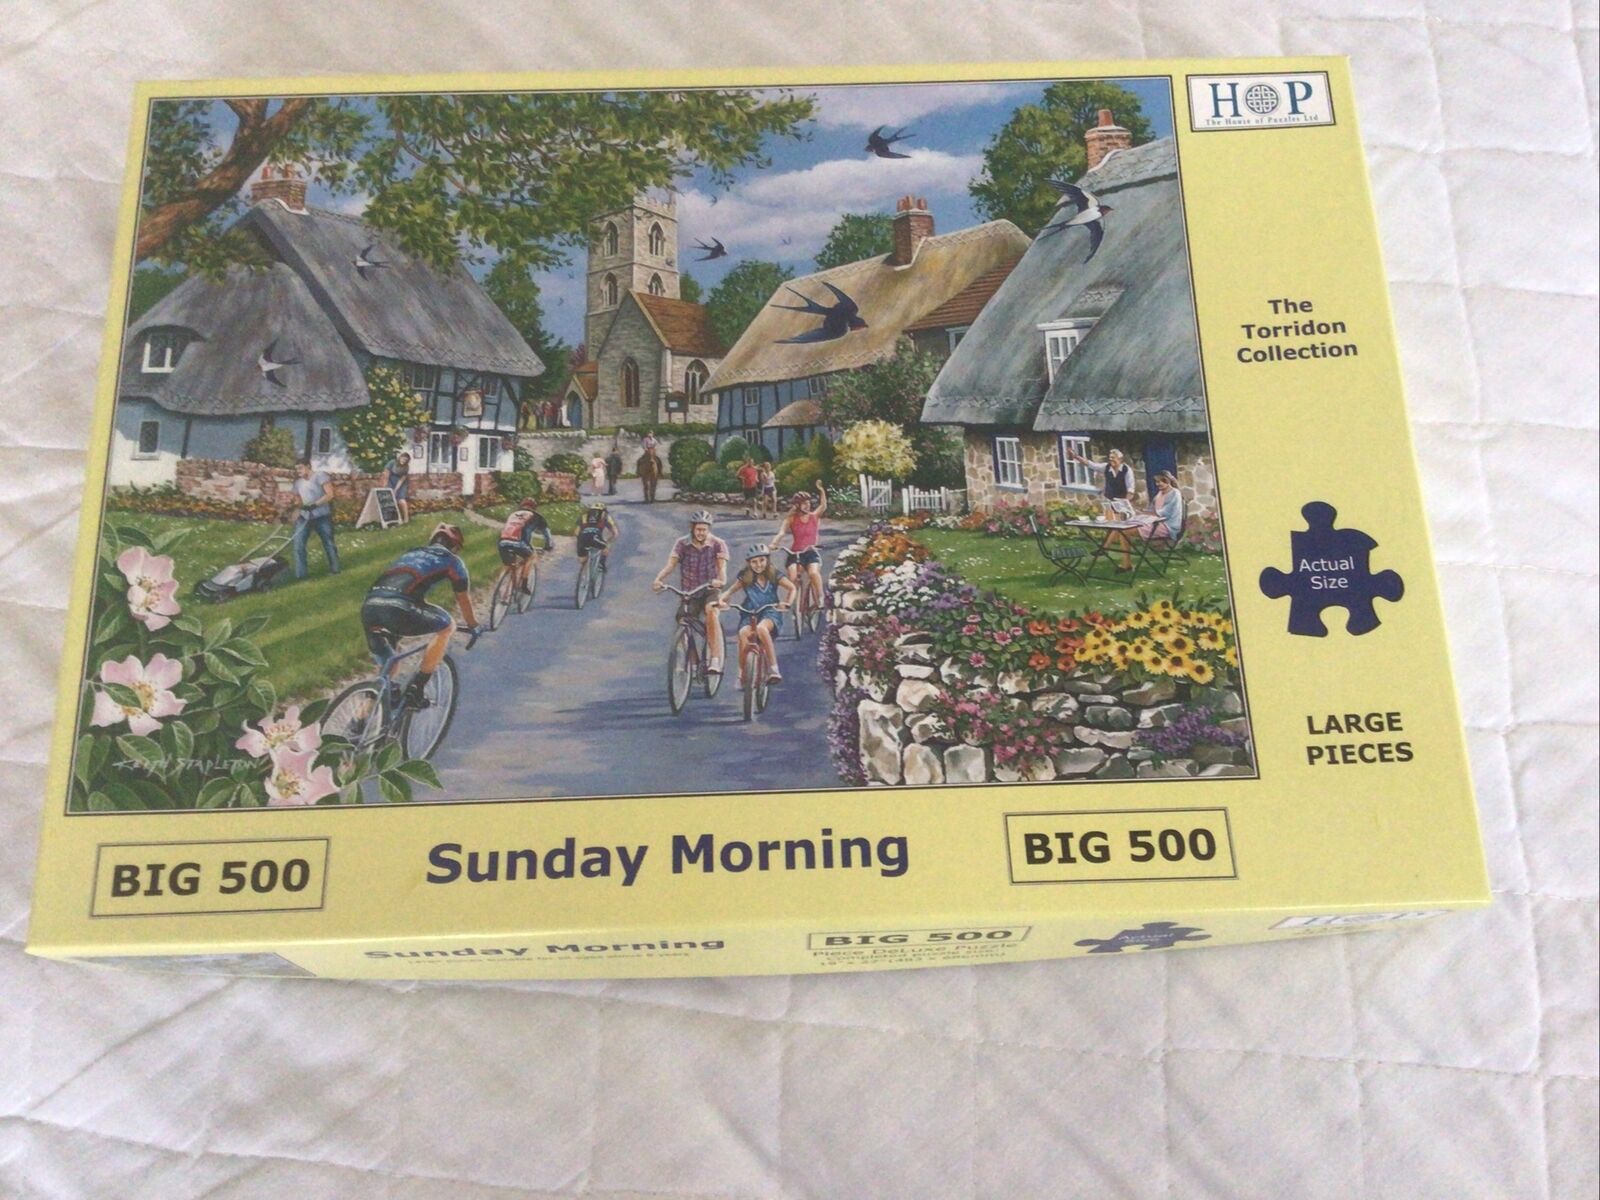 House of Puzzles Hop Sunday Morning Big 500 Xlpce Jigsaw Puzzle Mc507 for sale online